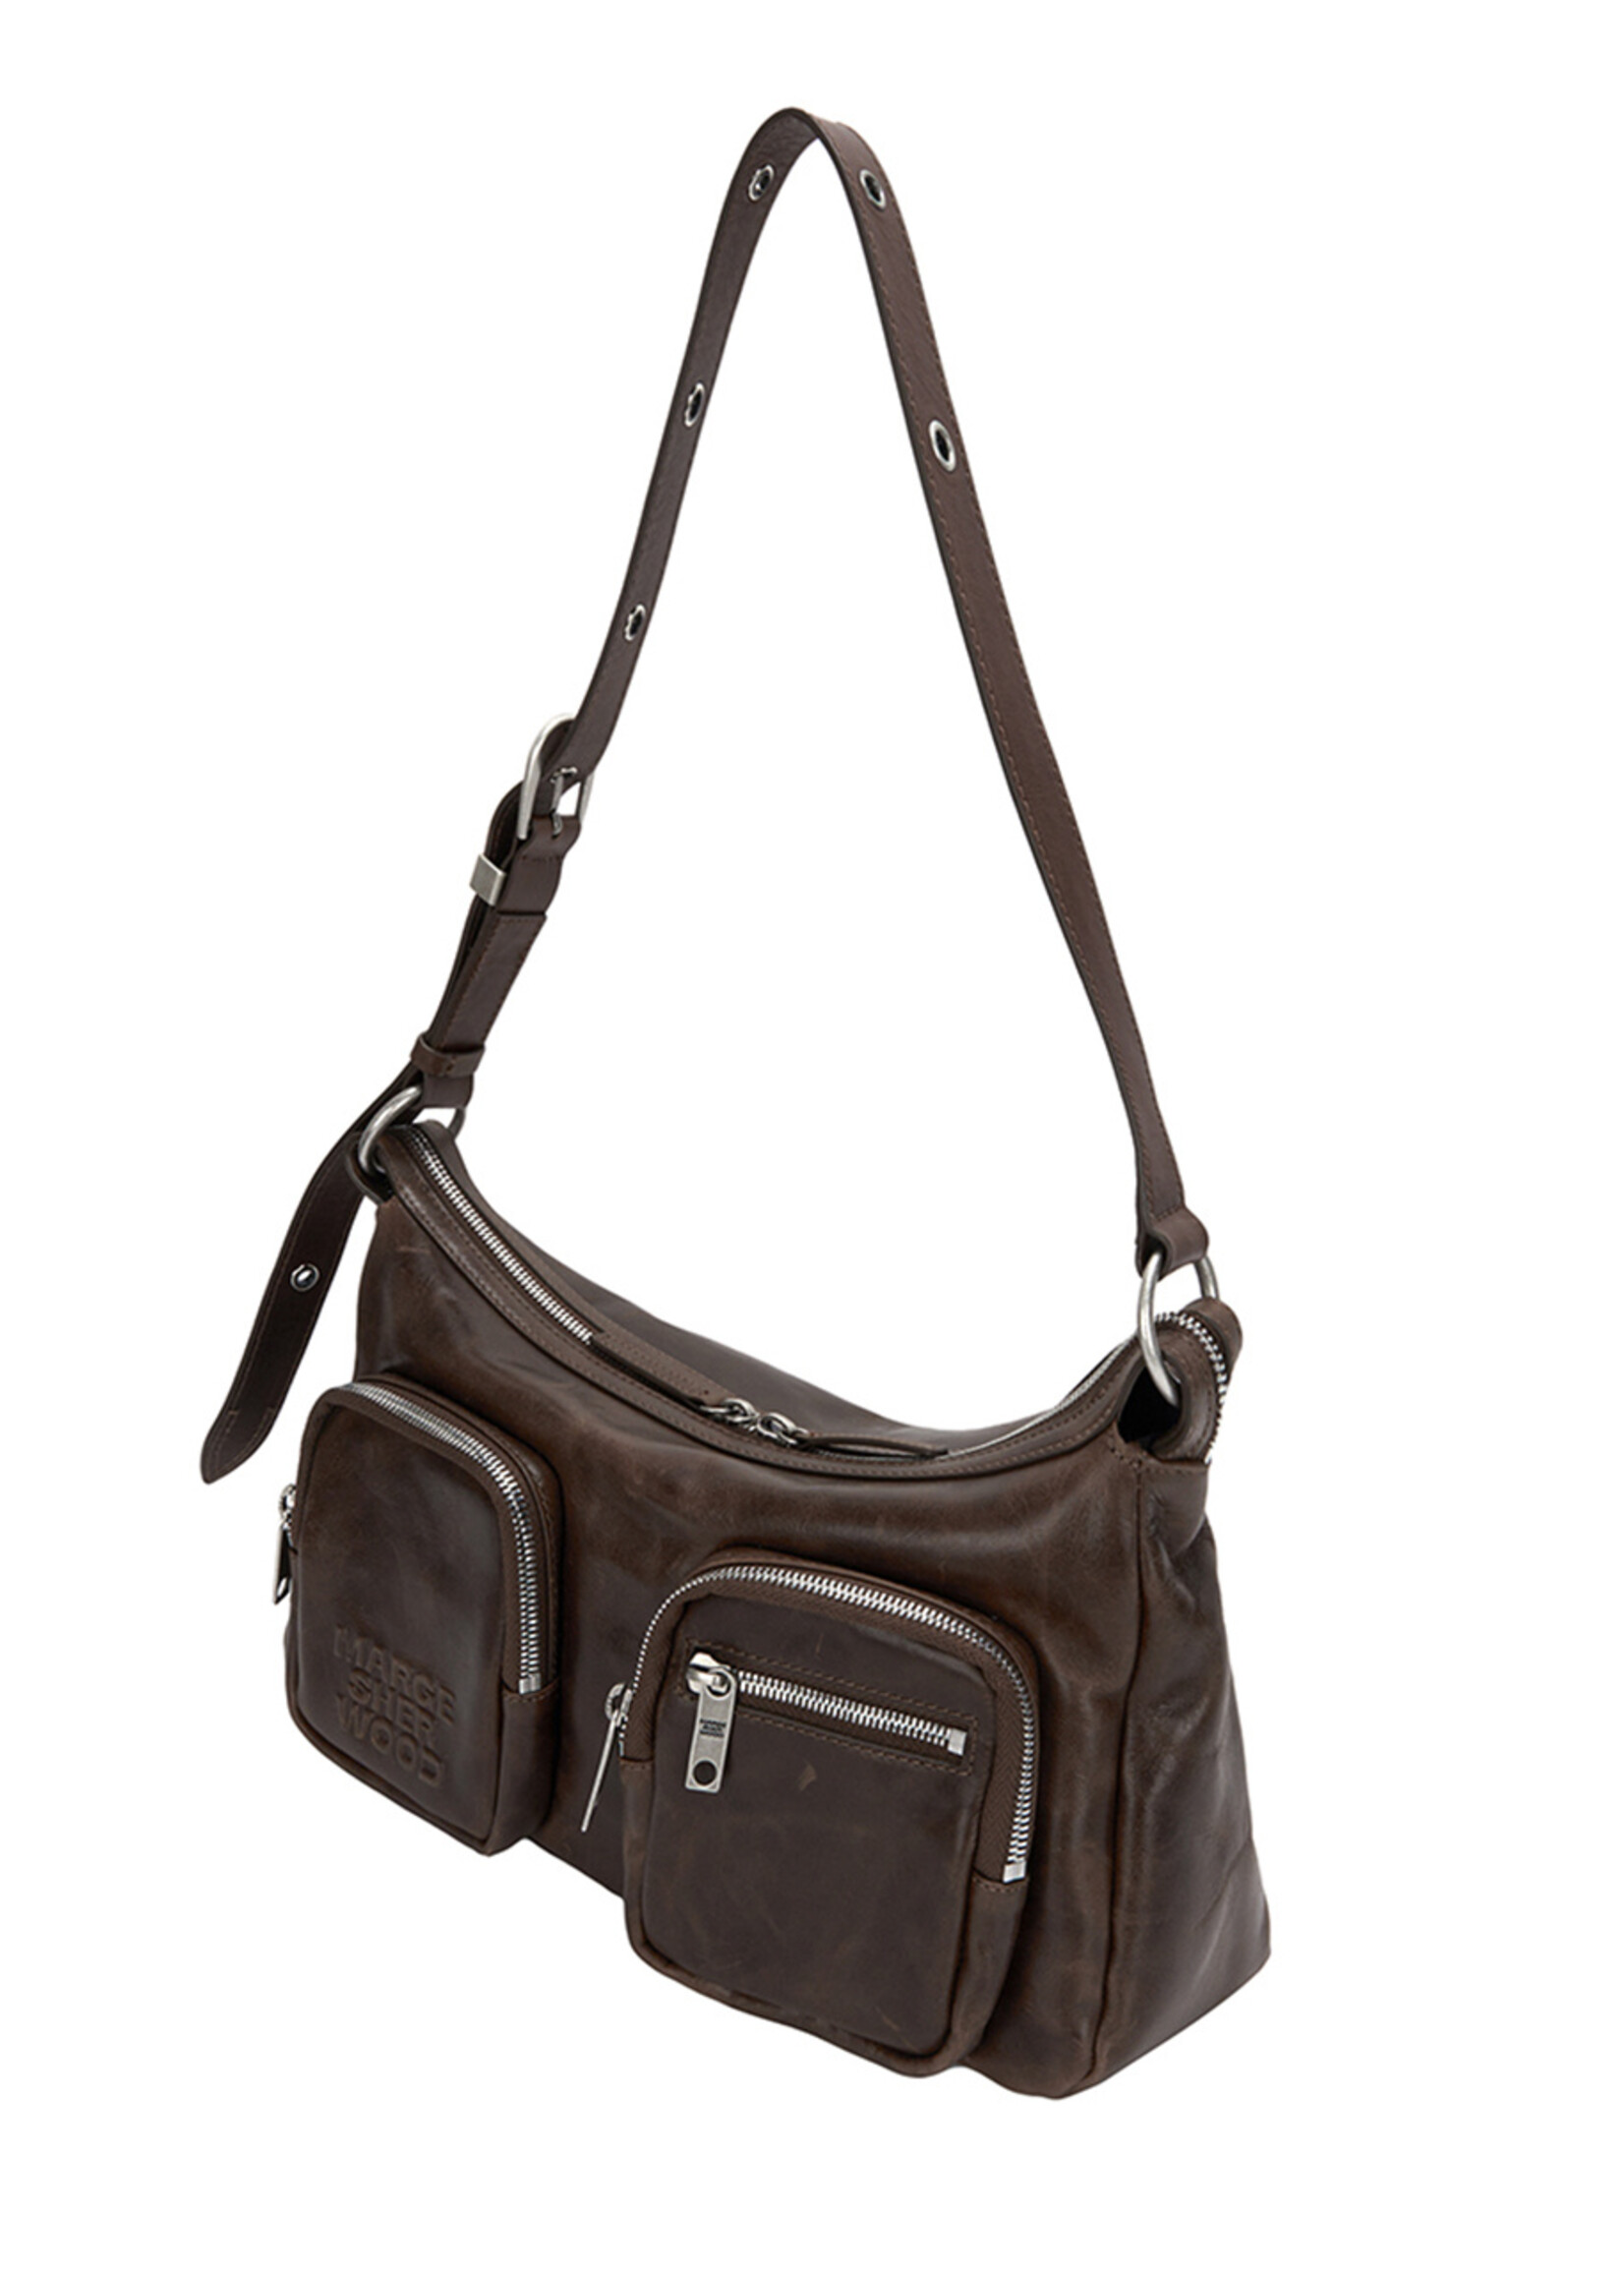 MARGE SHERWOOD OUTPOCKET HOBO BAG IN WASHED BROWN LEATHER